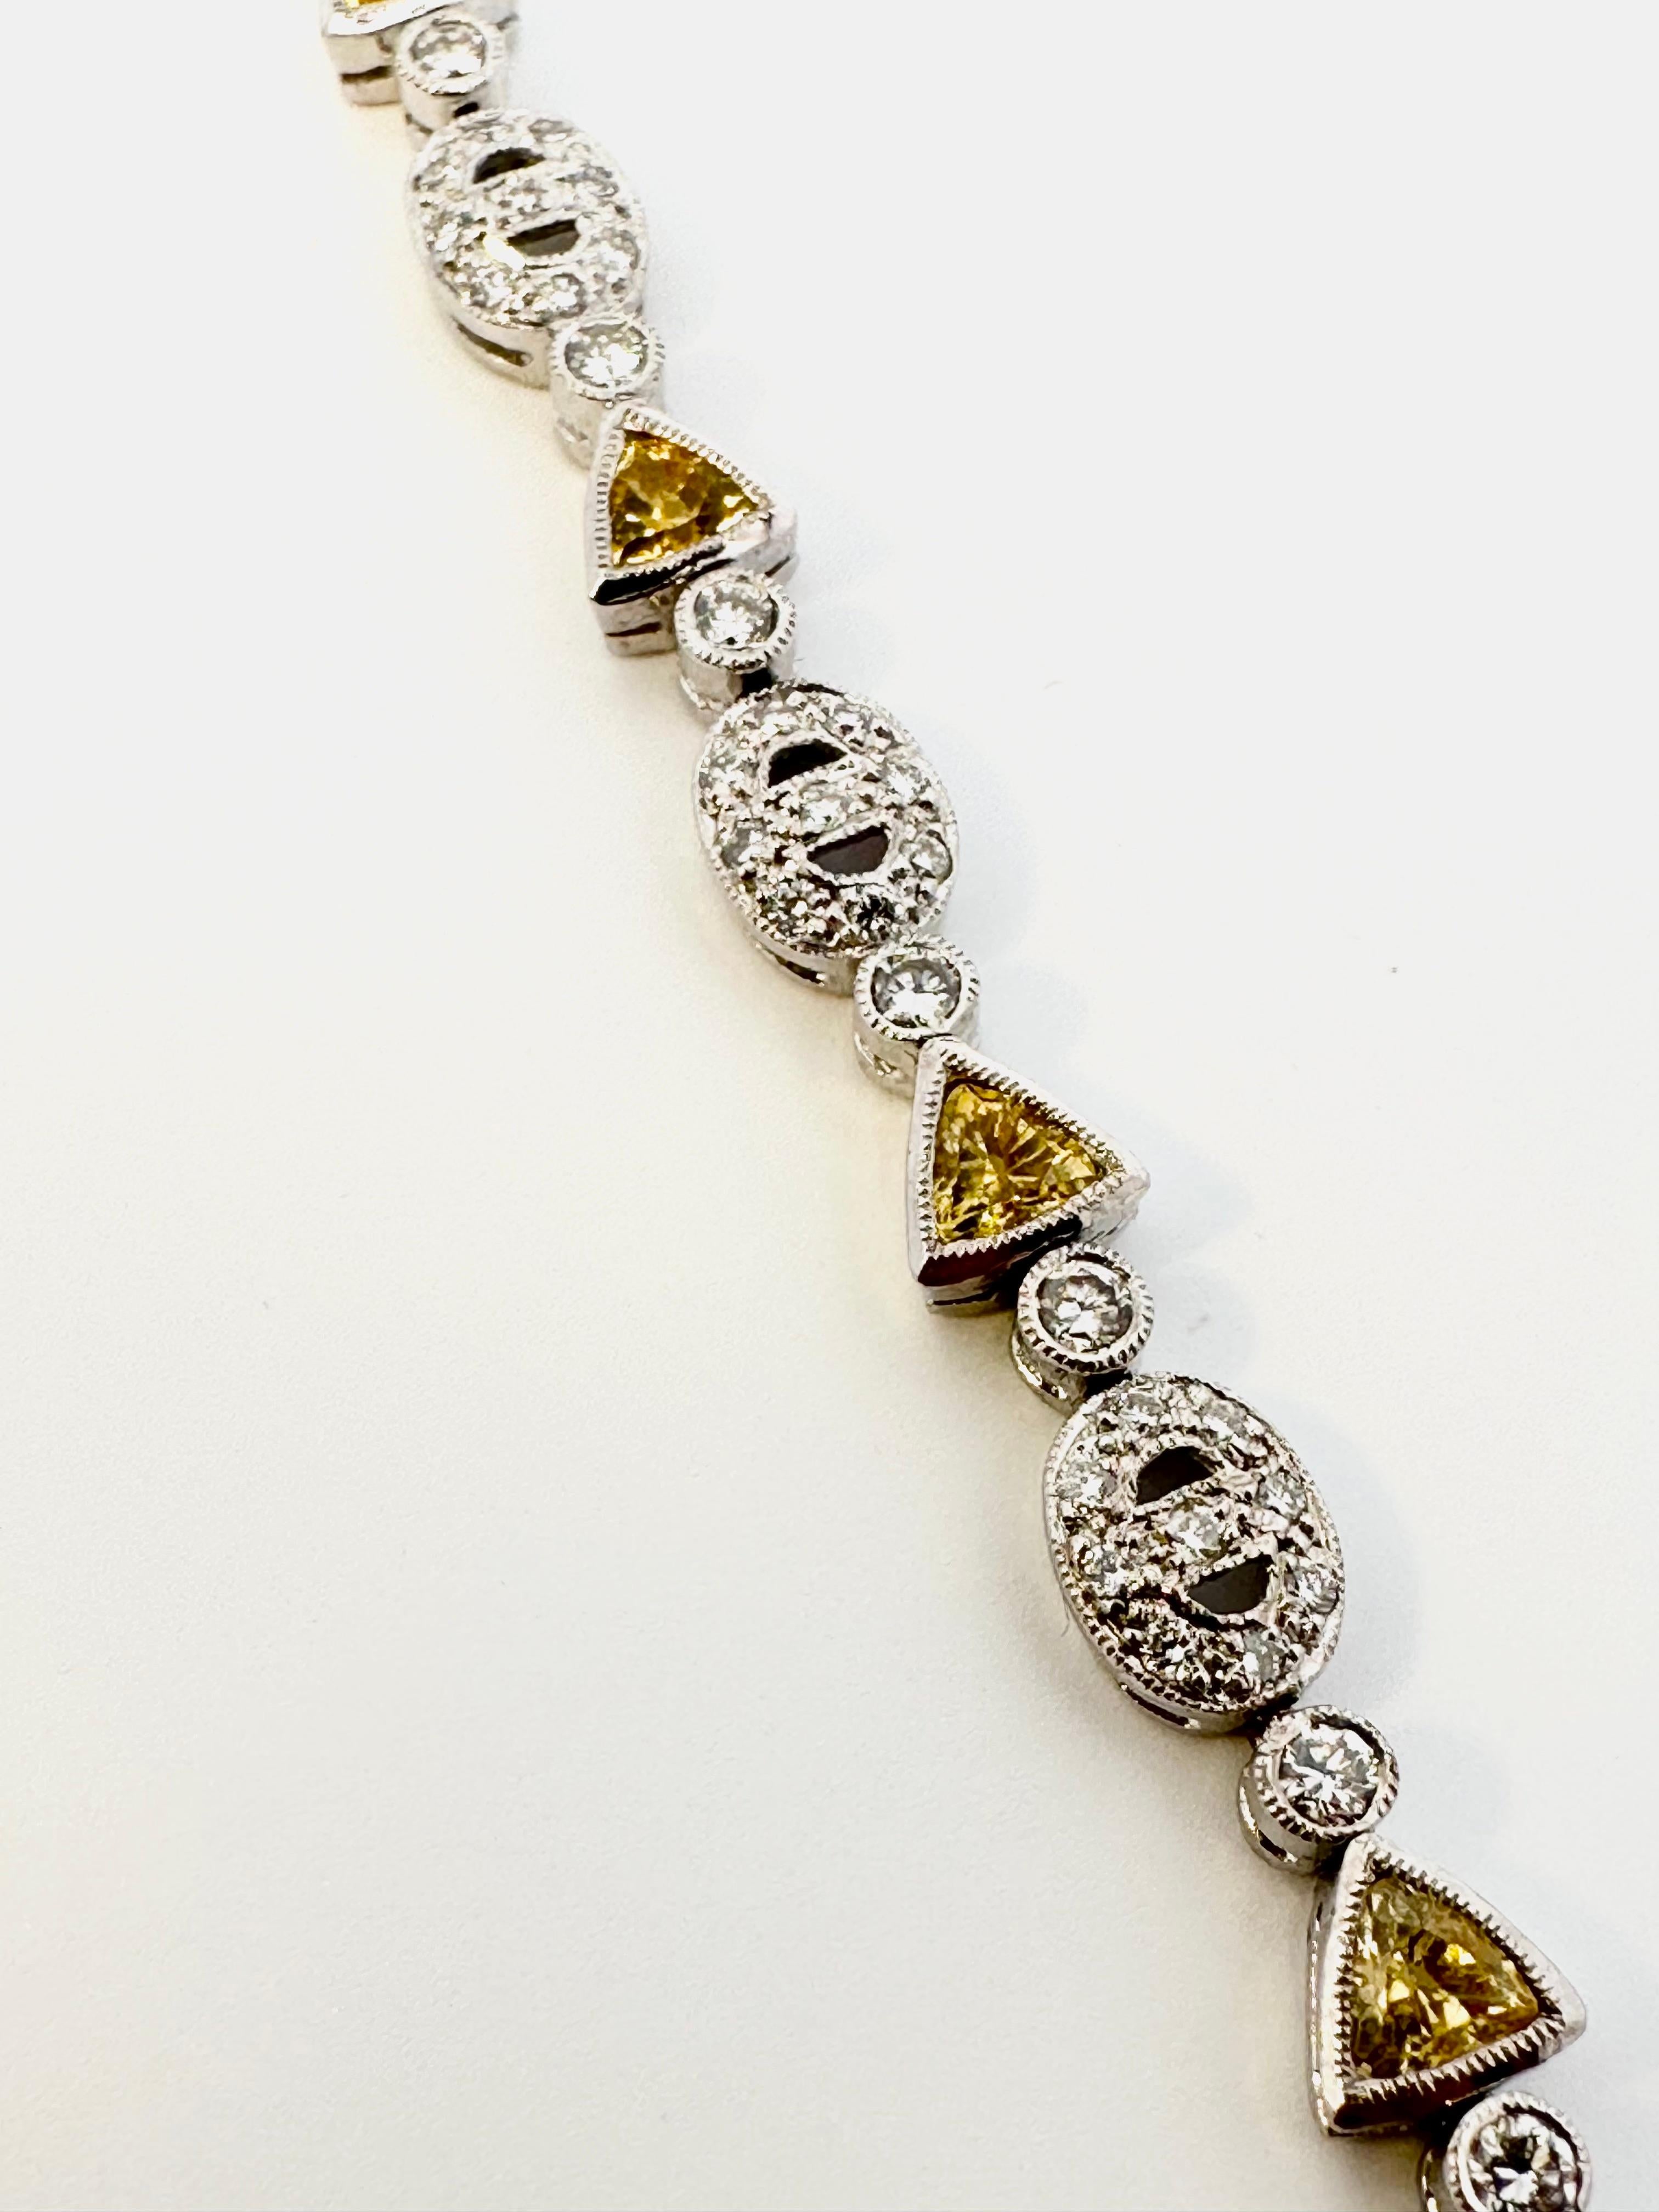 One 18kt white gold bracelet set with trillion cut natural yellow sapphires and brilliant cut diamonds. Perfect for everyday with a little splash of colour. 

10 trillion cut natural yellow sapphires weighing 2.50ct total weight

110 brilliant cut